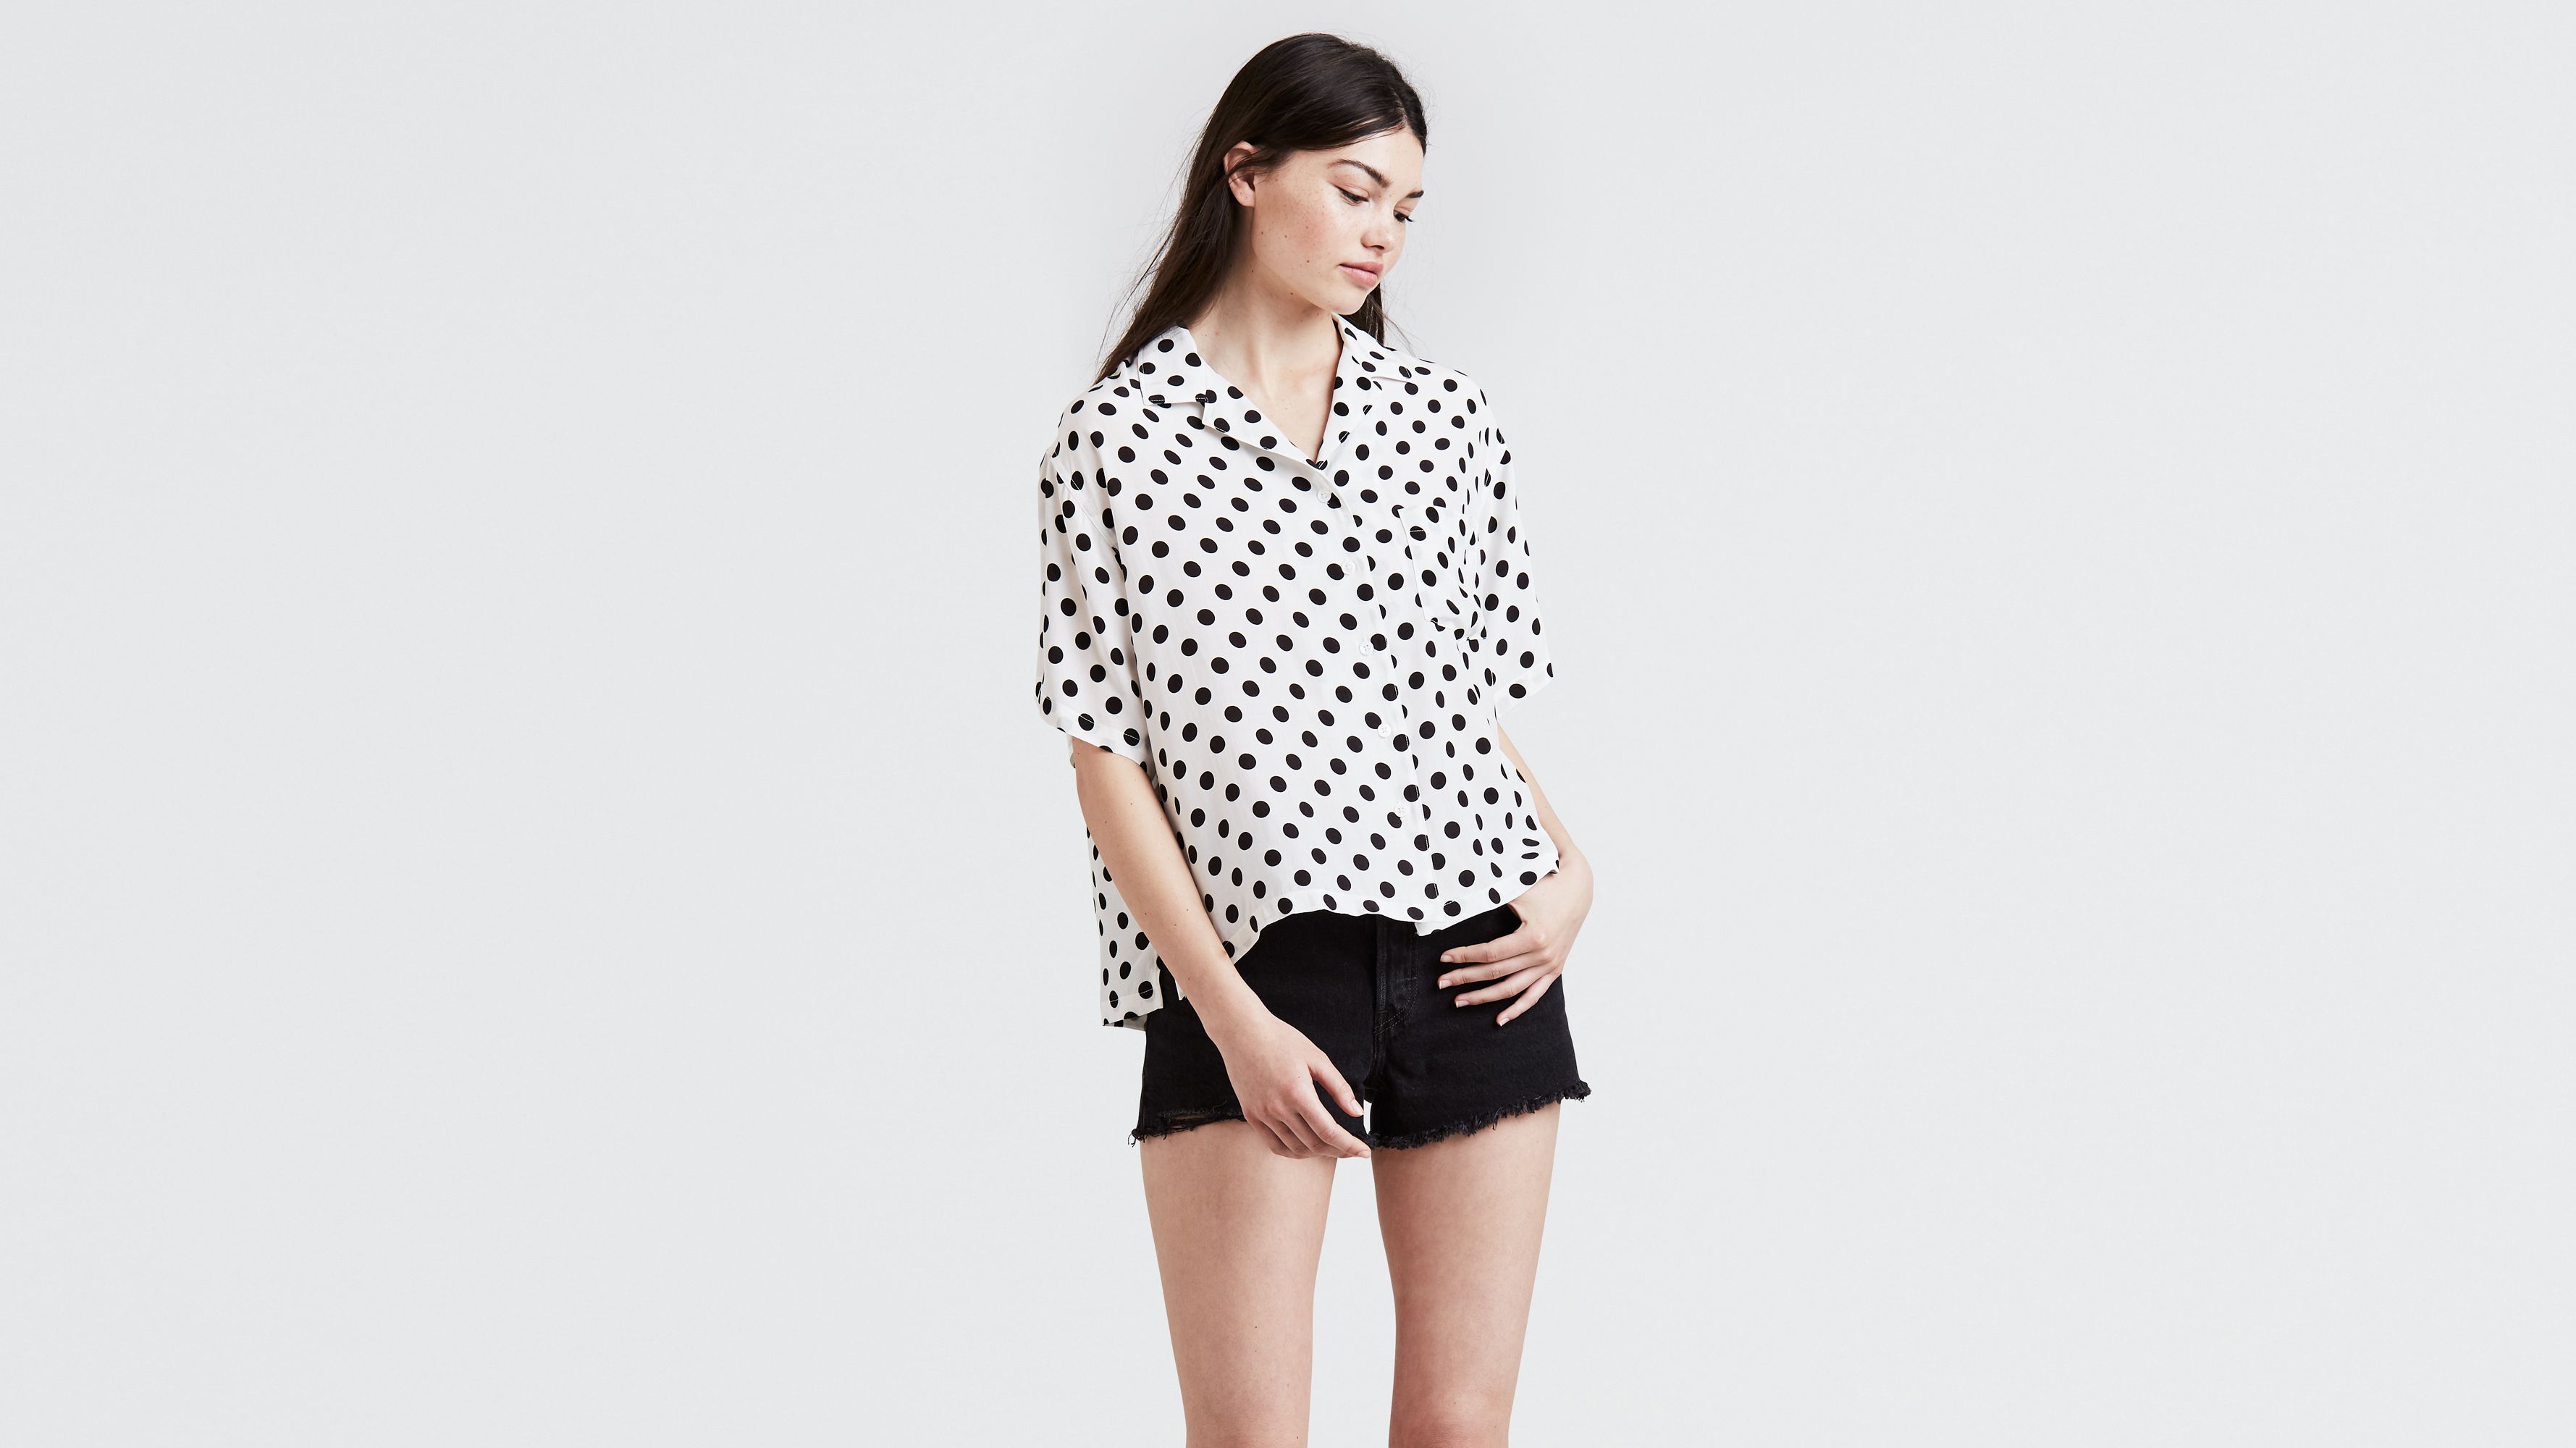 Women's Loose Casual Short Sleeve Top Pink Polka Dots on Black T-Shirt  Blouse(227rh9f)